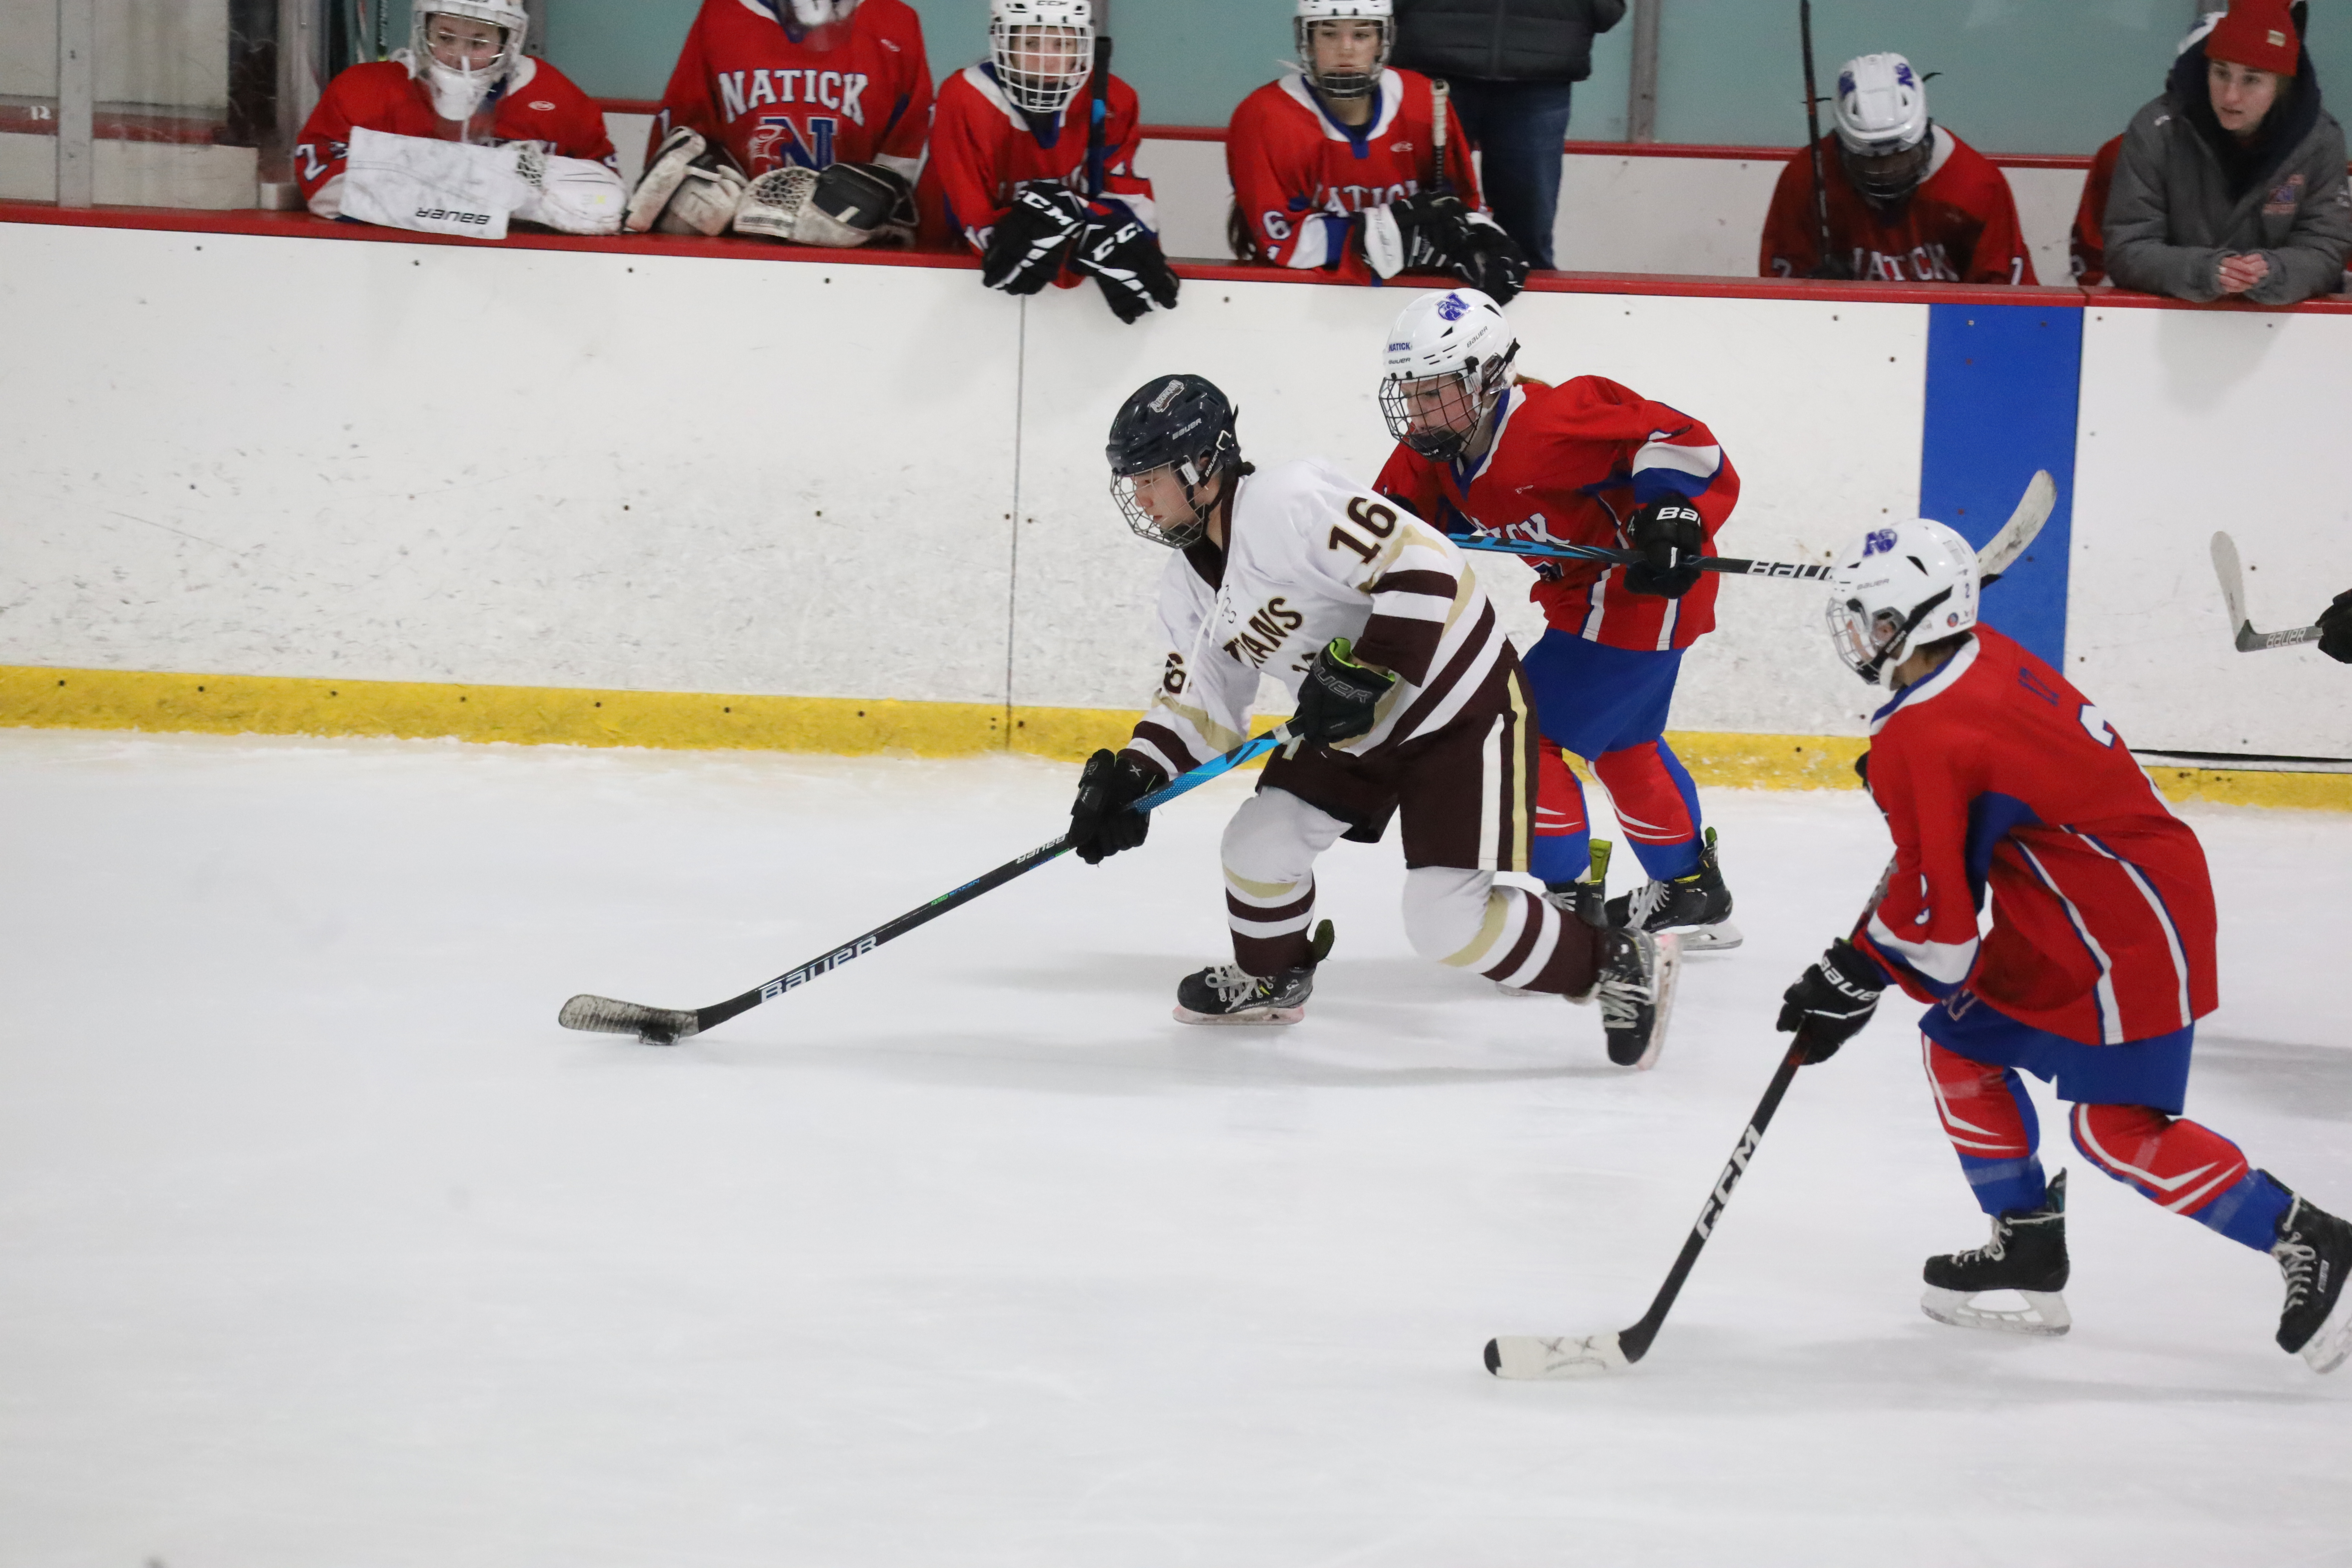 Algonquin takes down Natick in defense-forward girls hockey matchup